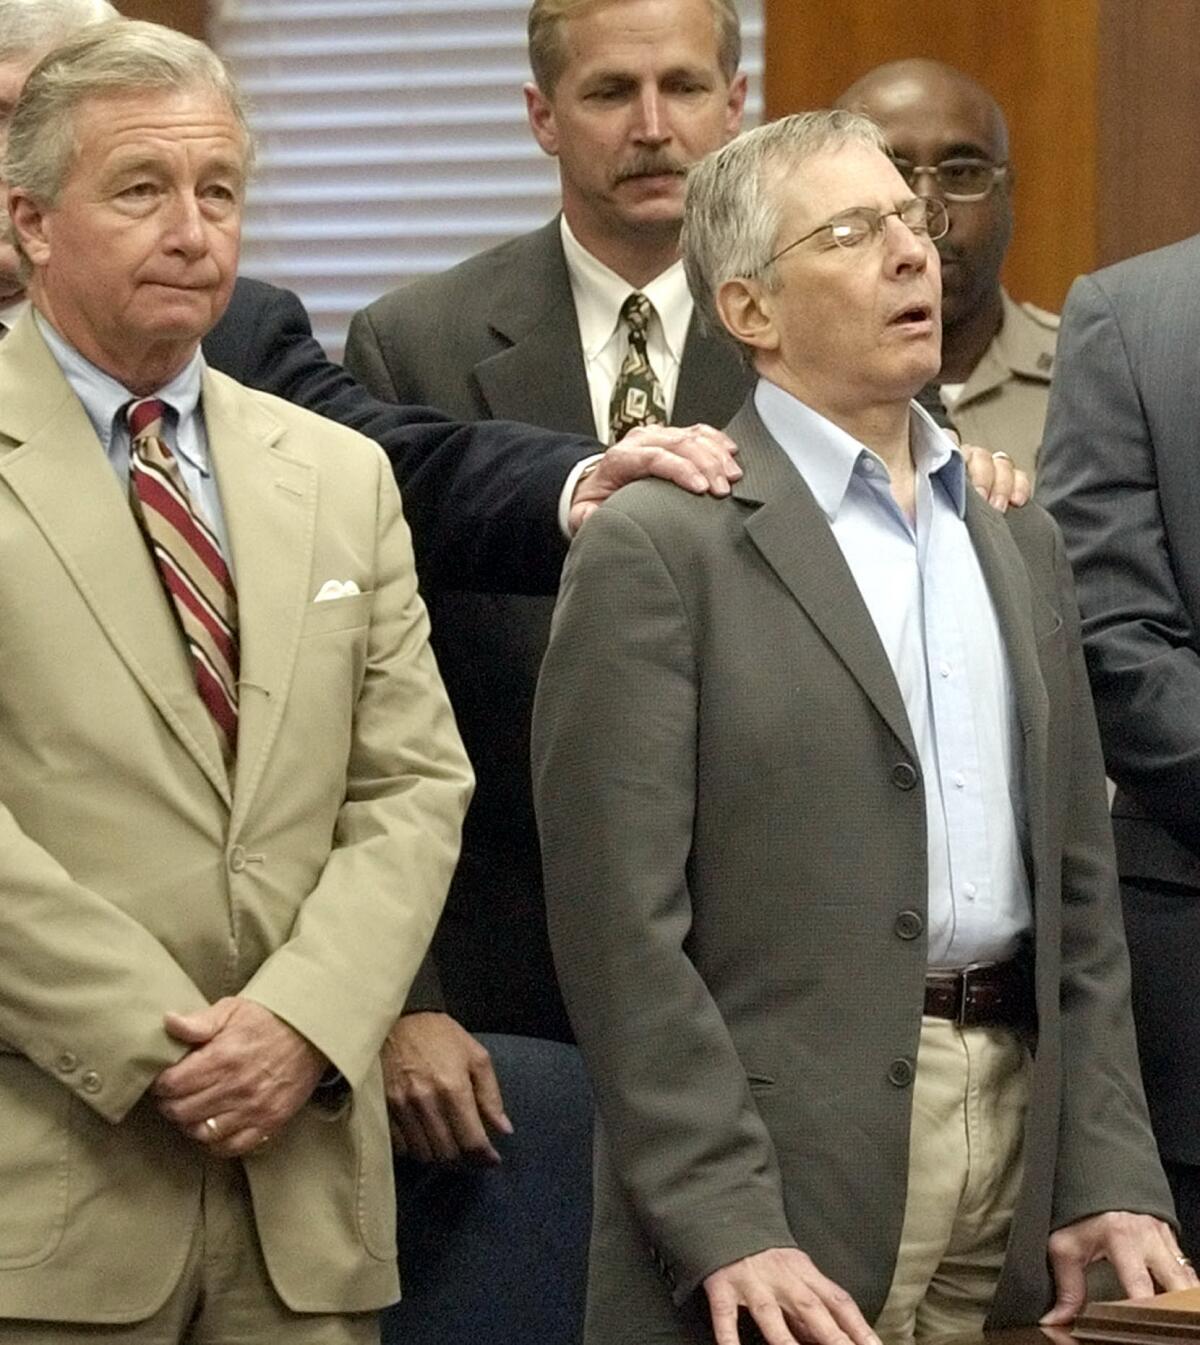 Standing with his attorneys, multi-millionaire murder defendant Robert Durst, right, reacts to a not guilty verdict on Nov. 11, 2003, in Galveston, Texas.